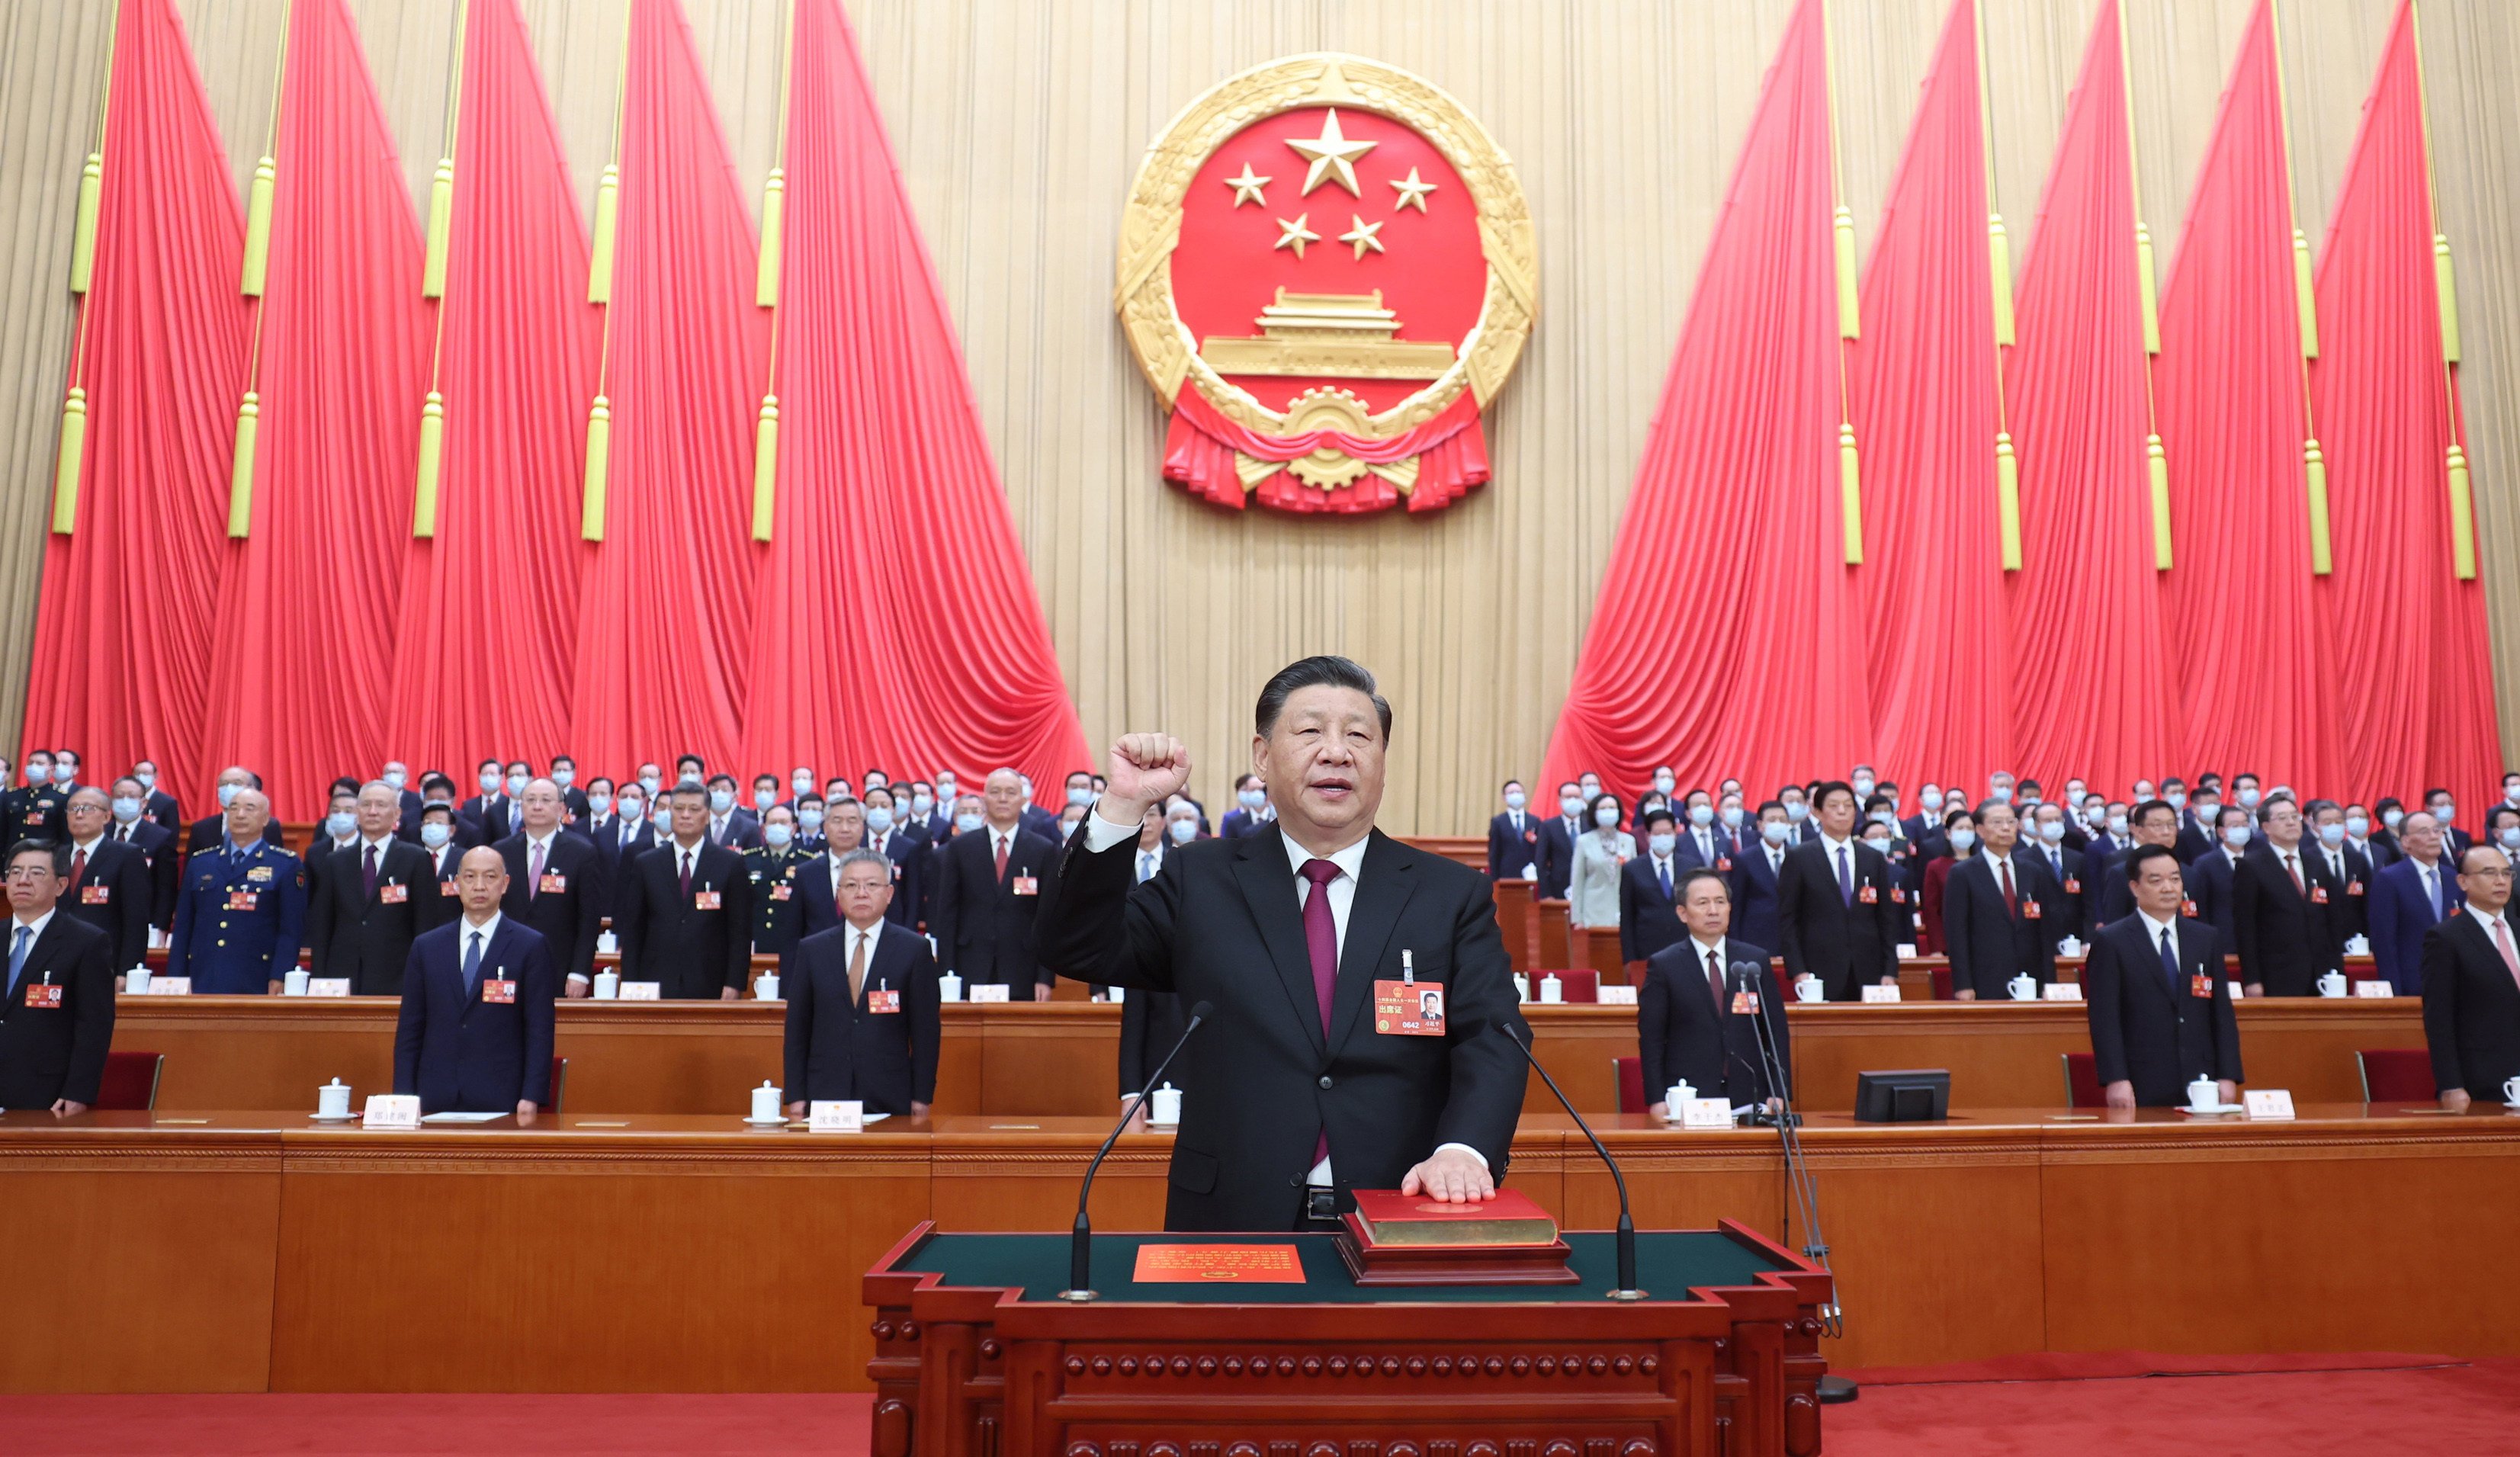 President Xi Jinping makes a public pledge of allegiance to the constitution at the Great Hall of the People in Beijing on March 10. Xi was unanimously re-elected president and chairman of the Central Military Commission. Photo: Xinhua